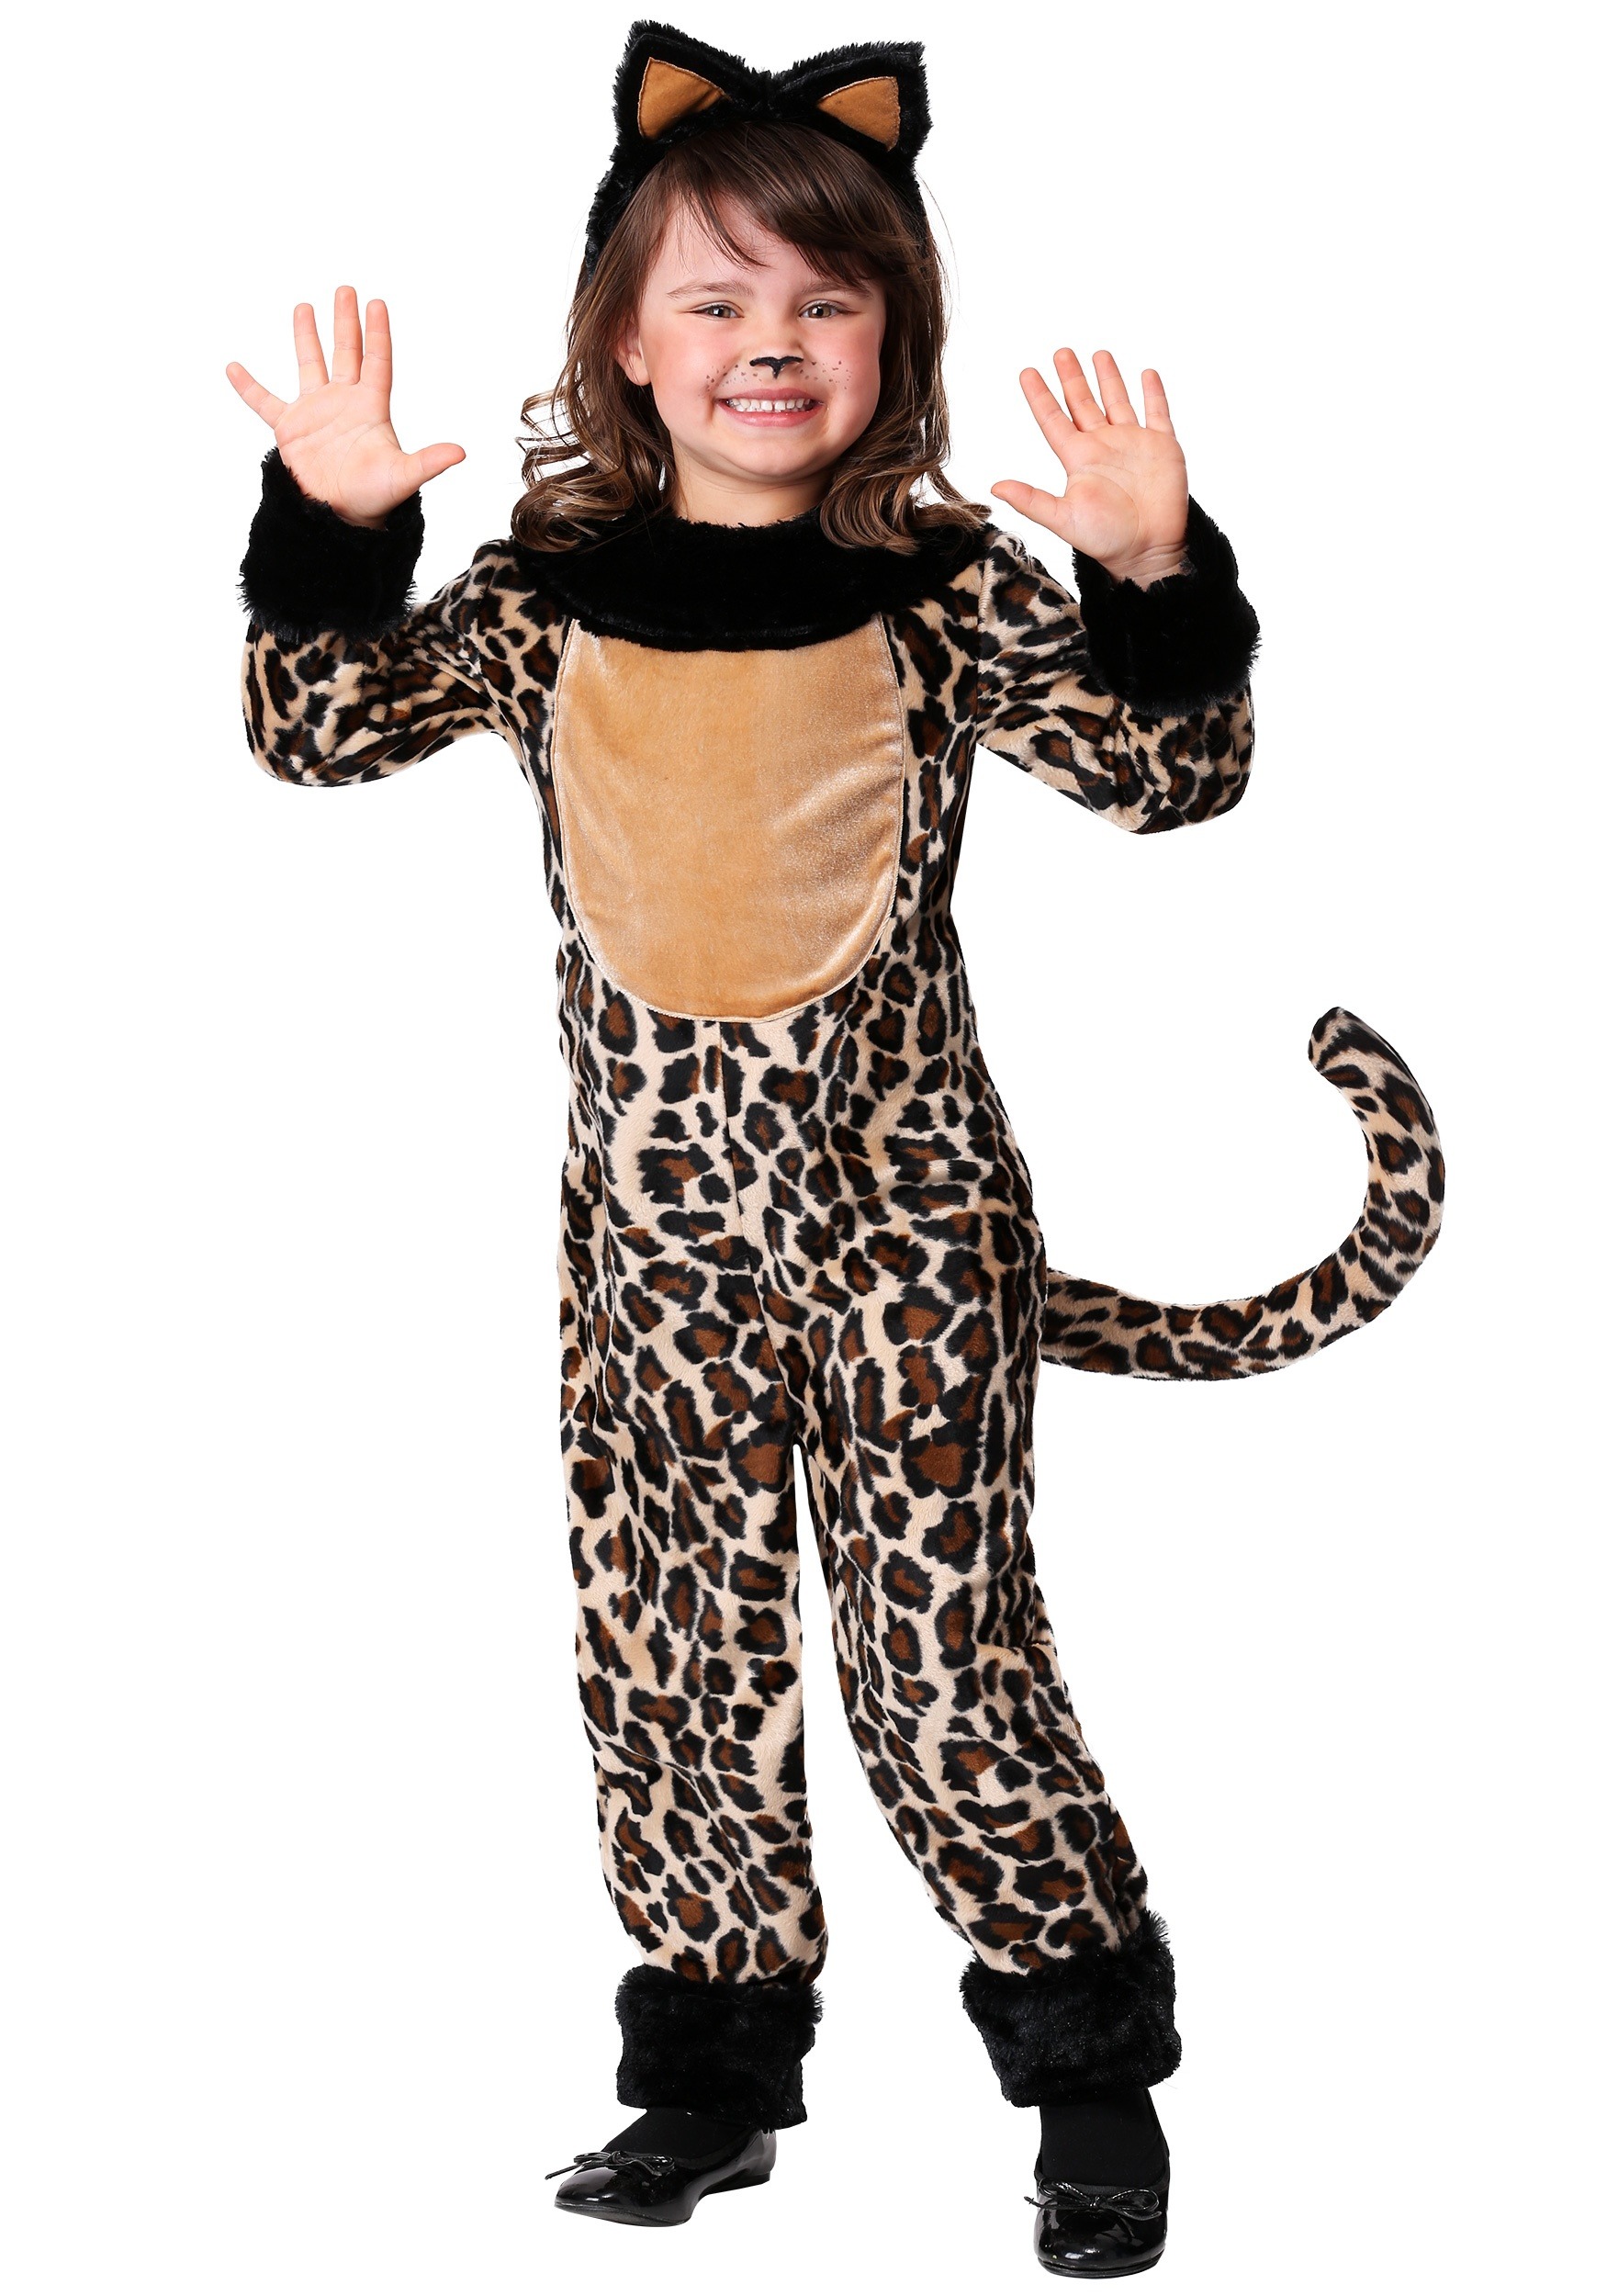 Photos - Fancy Dress Deluxe FUN Costumes Leaping Spotted Leopard Girl's Costume Brown/Beige FUN615 